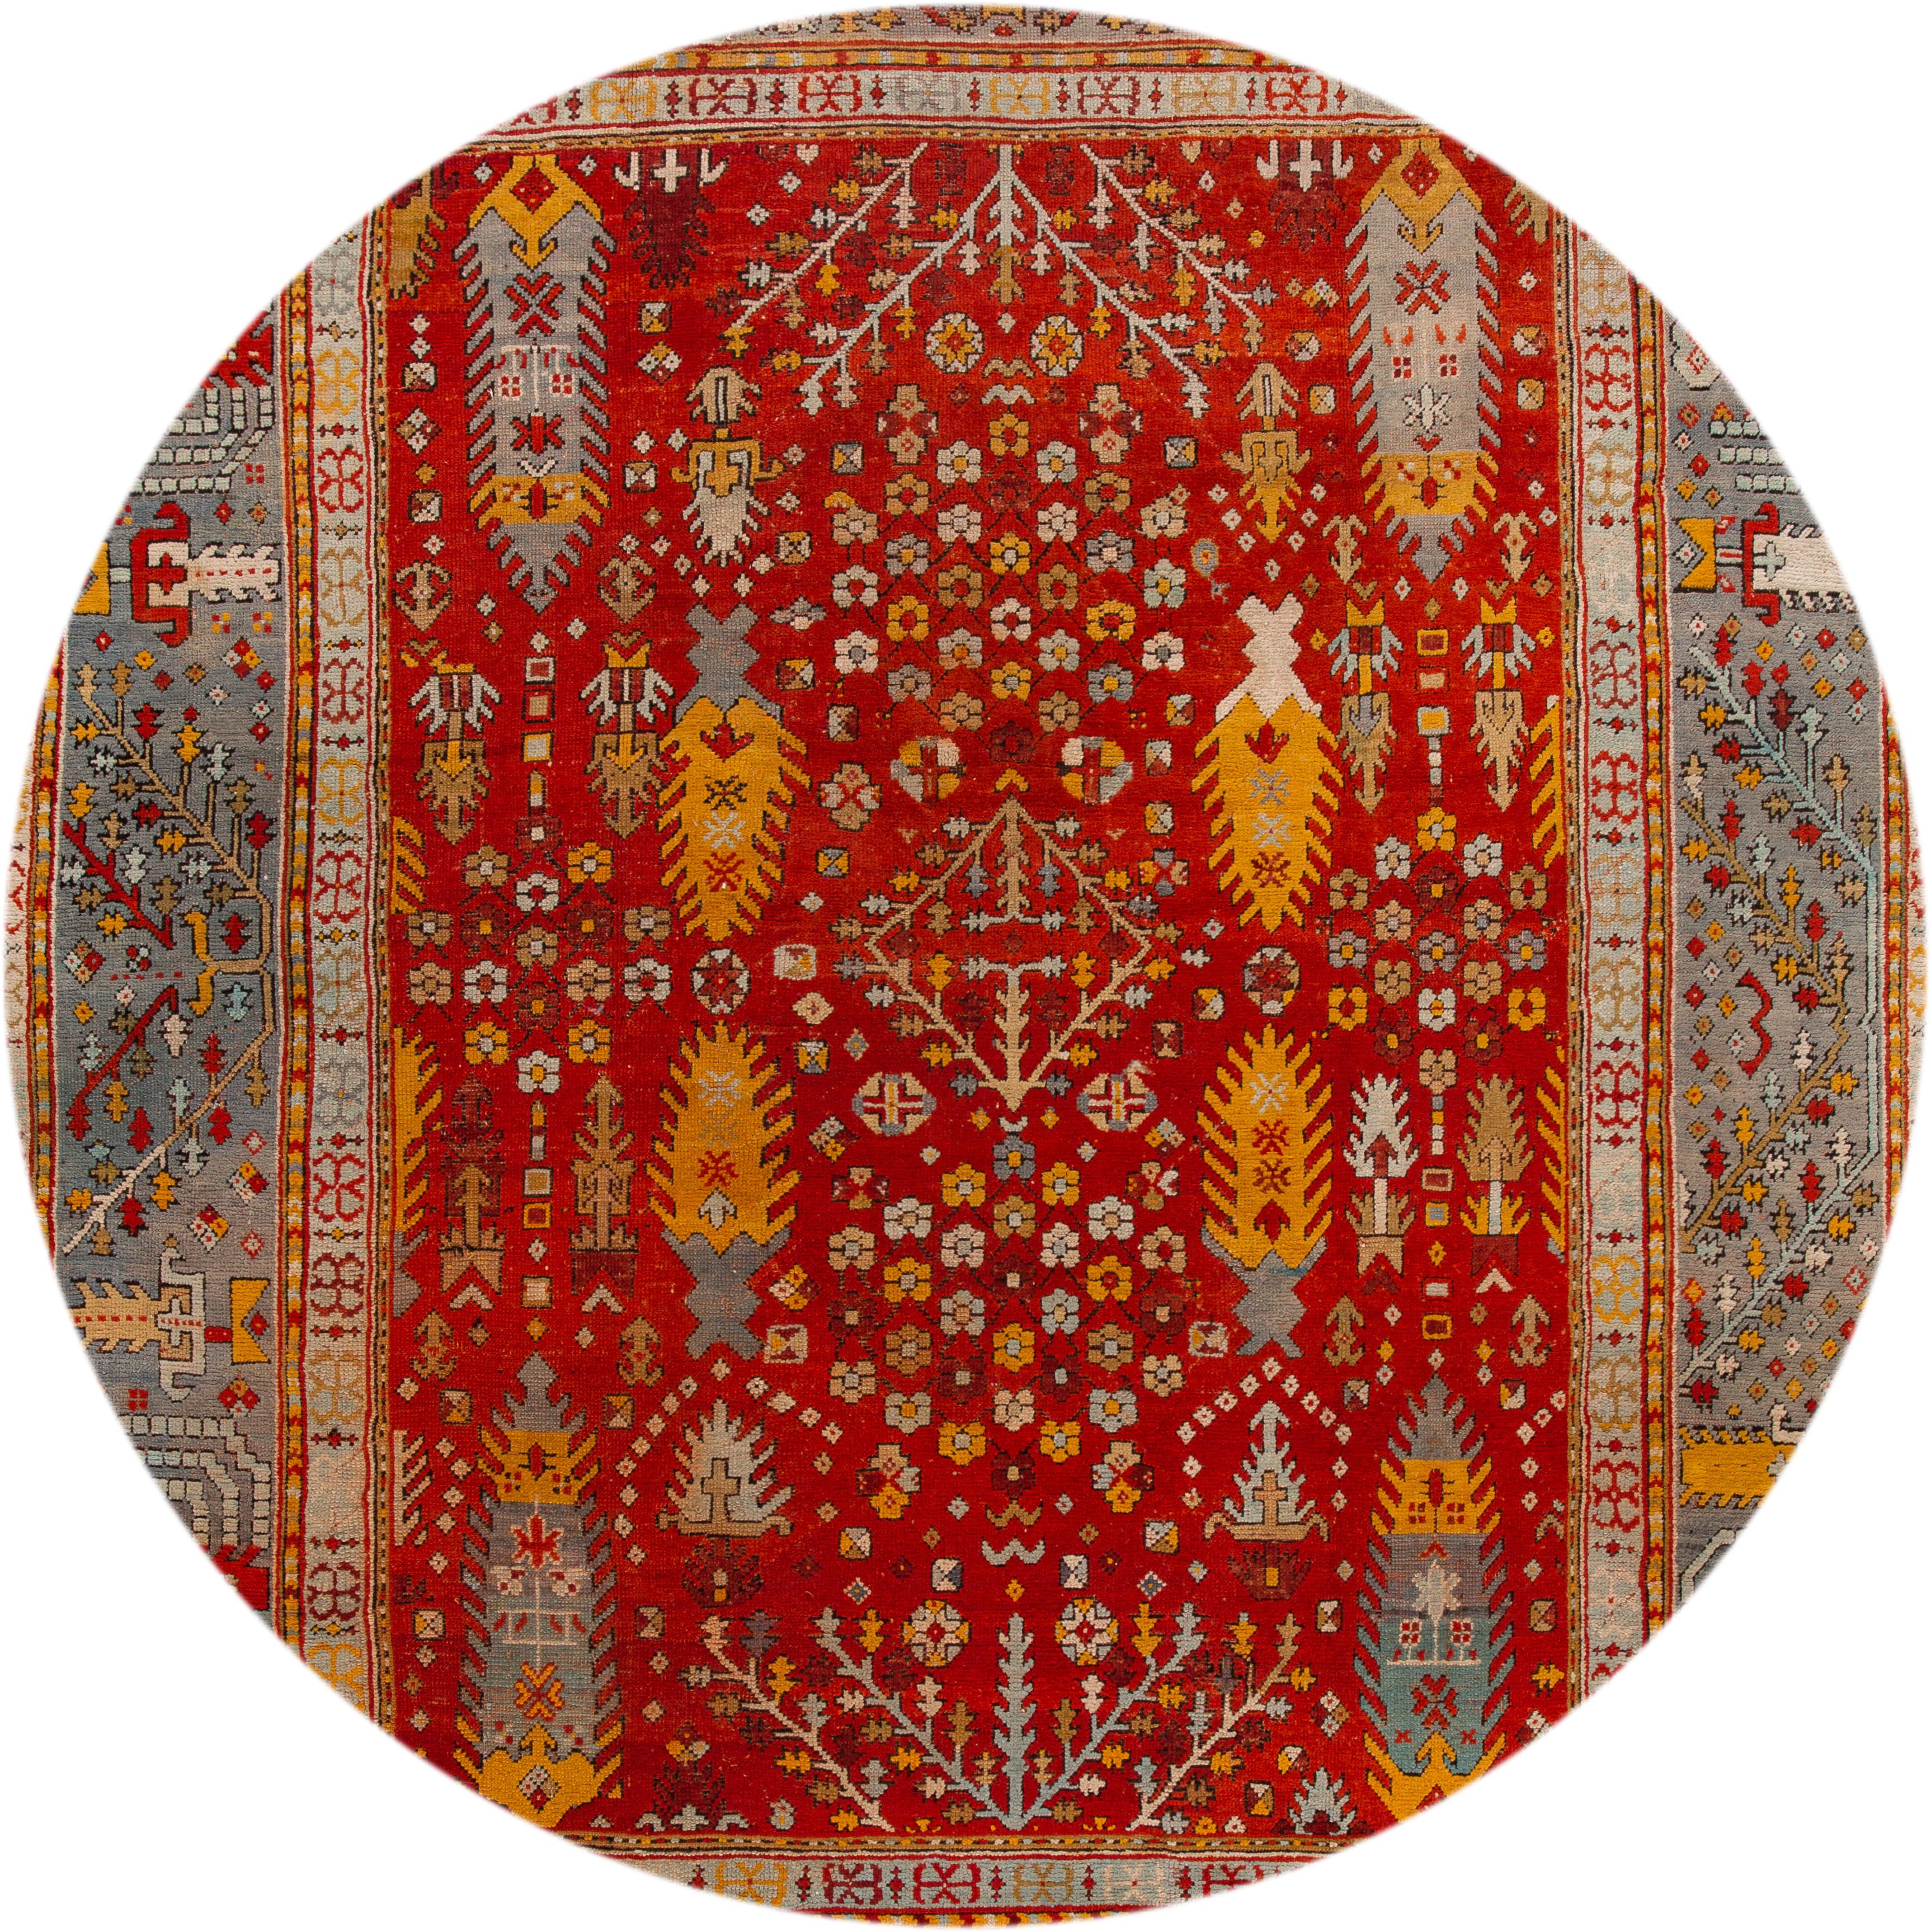 Beautiful antique Turkish Oushak rug, hand knotted wool with a bright red field, blue frame, blue and yellow accents in an all-over Classic motif, circa 1890.
This rug measures 11' 6